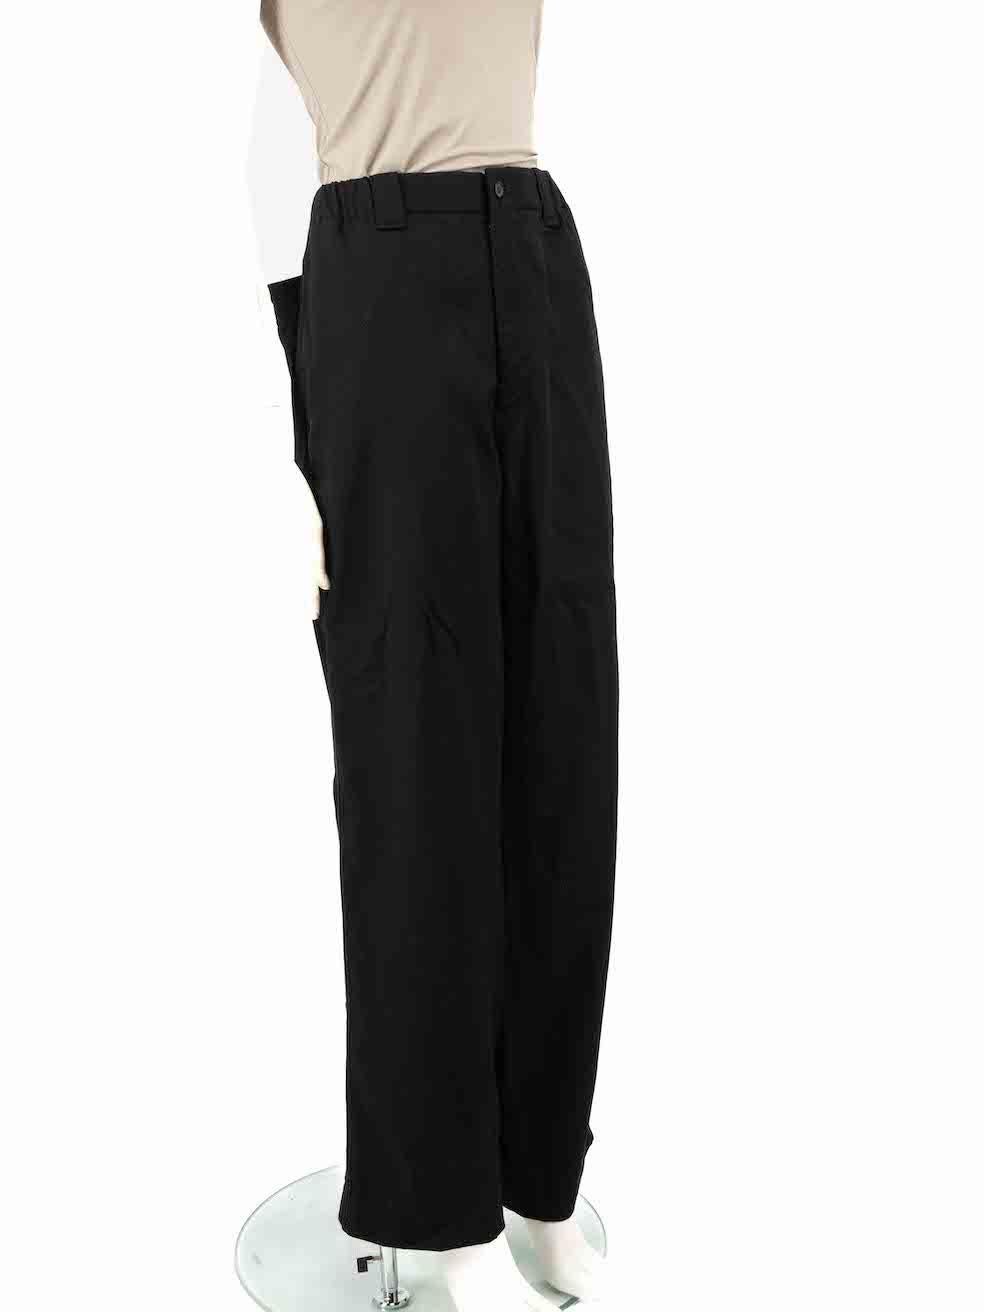 CONDITION is Very good. Minimal wear to trousers is evident. Minimal wear to the fabric with one or two small abrasions to the weave found at the front rise under the fly on this used Y's by Yohji Yamamoto designer resale item. However, due to poor